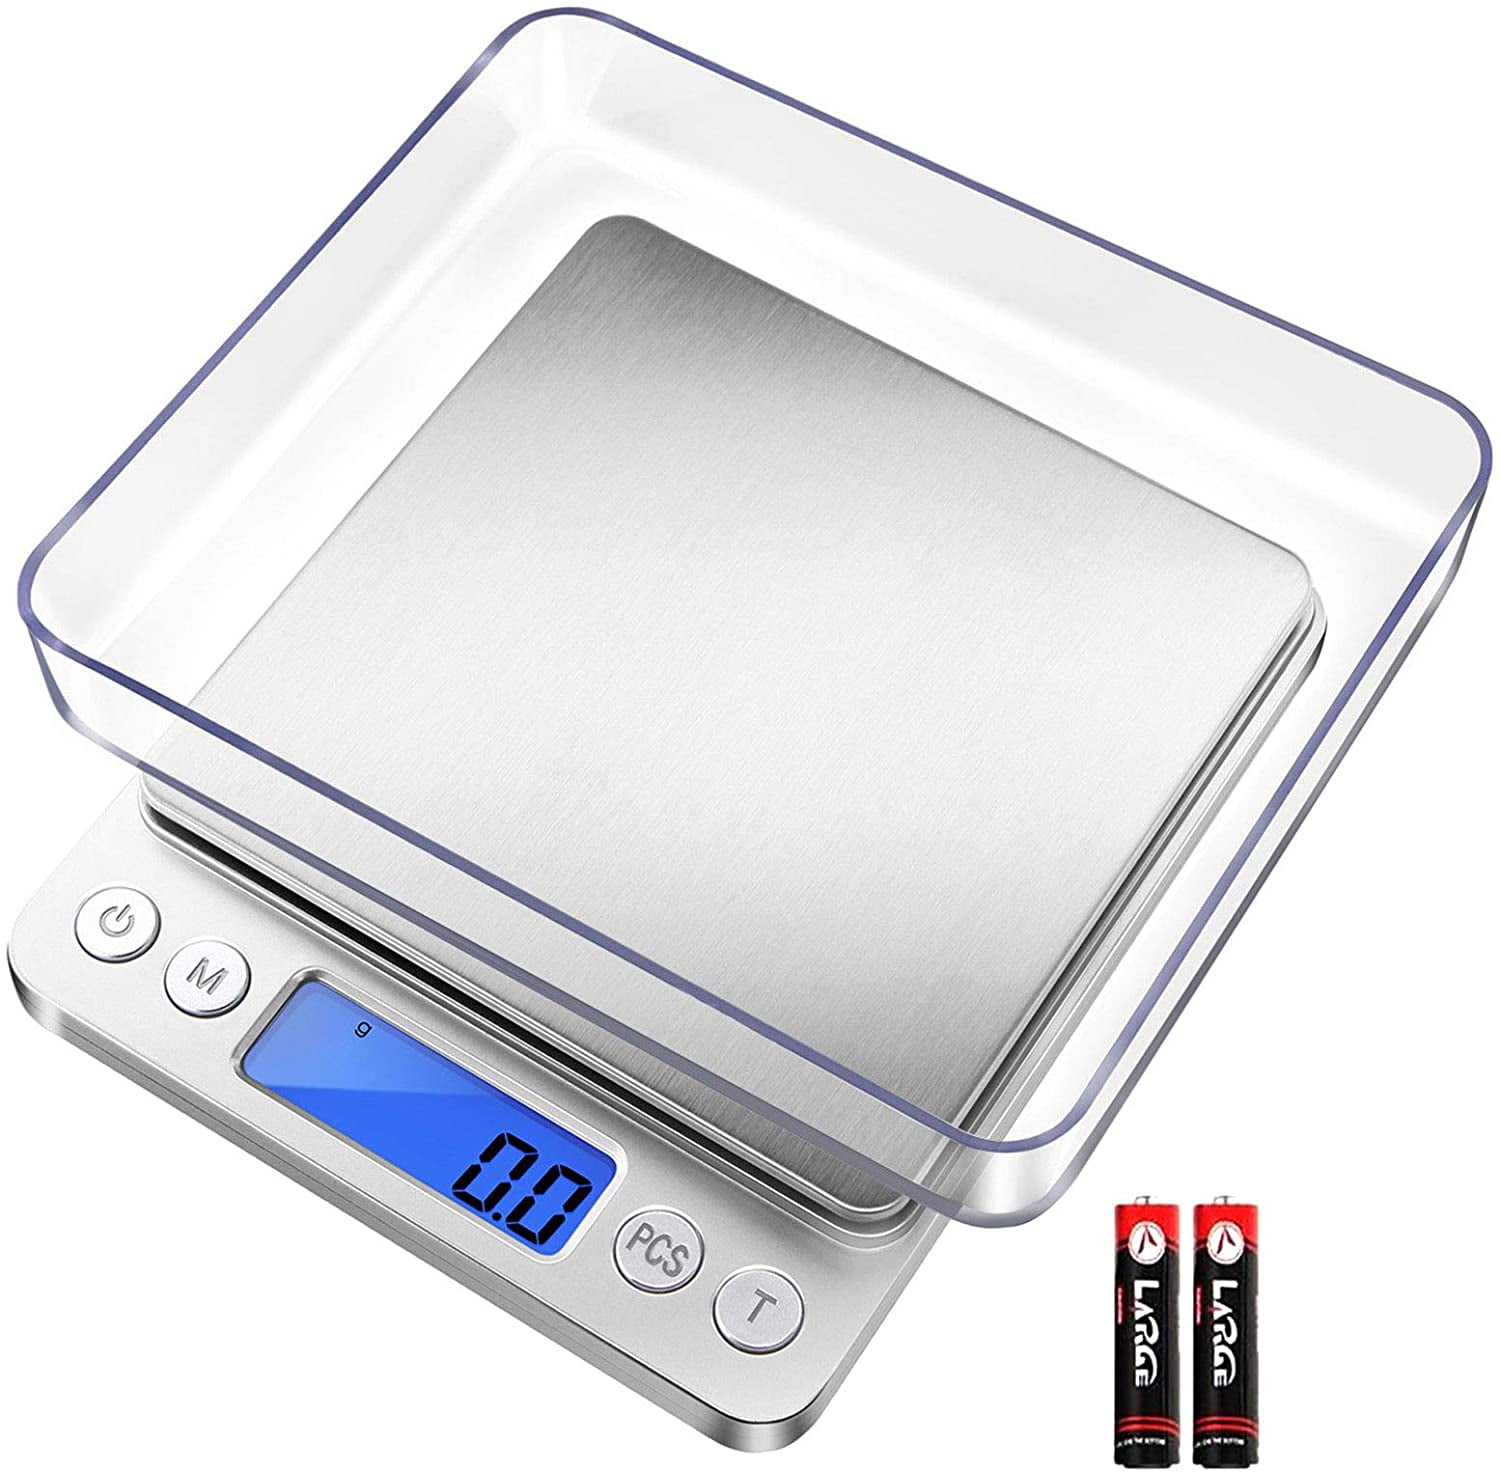  RENPHO Digital Food Scale, Kitchen Scale Weight Grams and oz  for Baking, Cooking and Coffee with Nutritional Calculator for Keto, Macro,  Calorie and Weight Loss with Smartphone App, Stainless Steel: Home